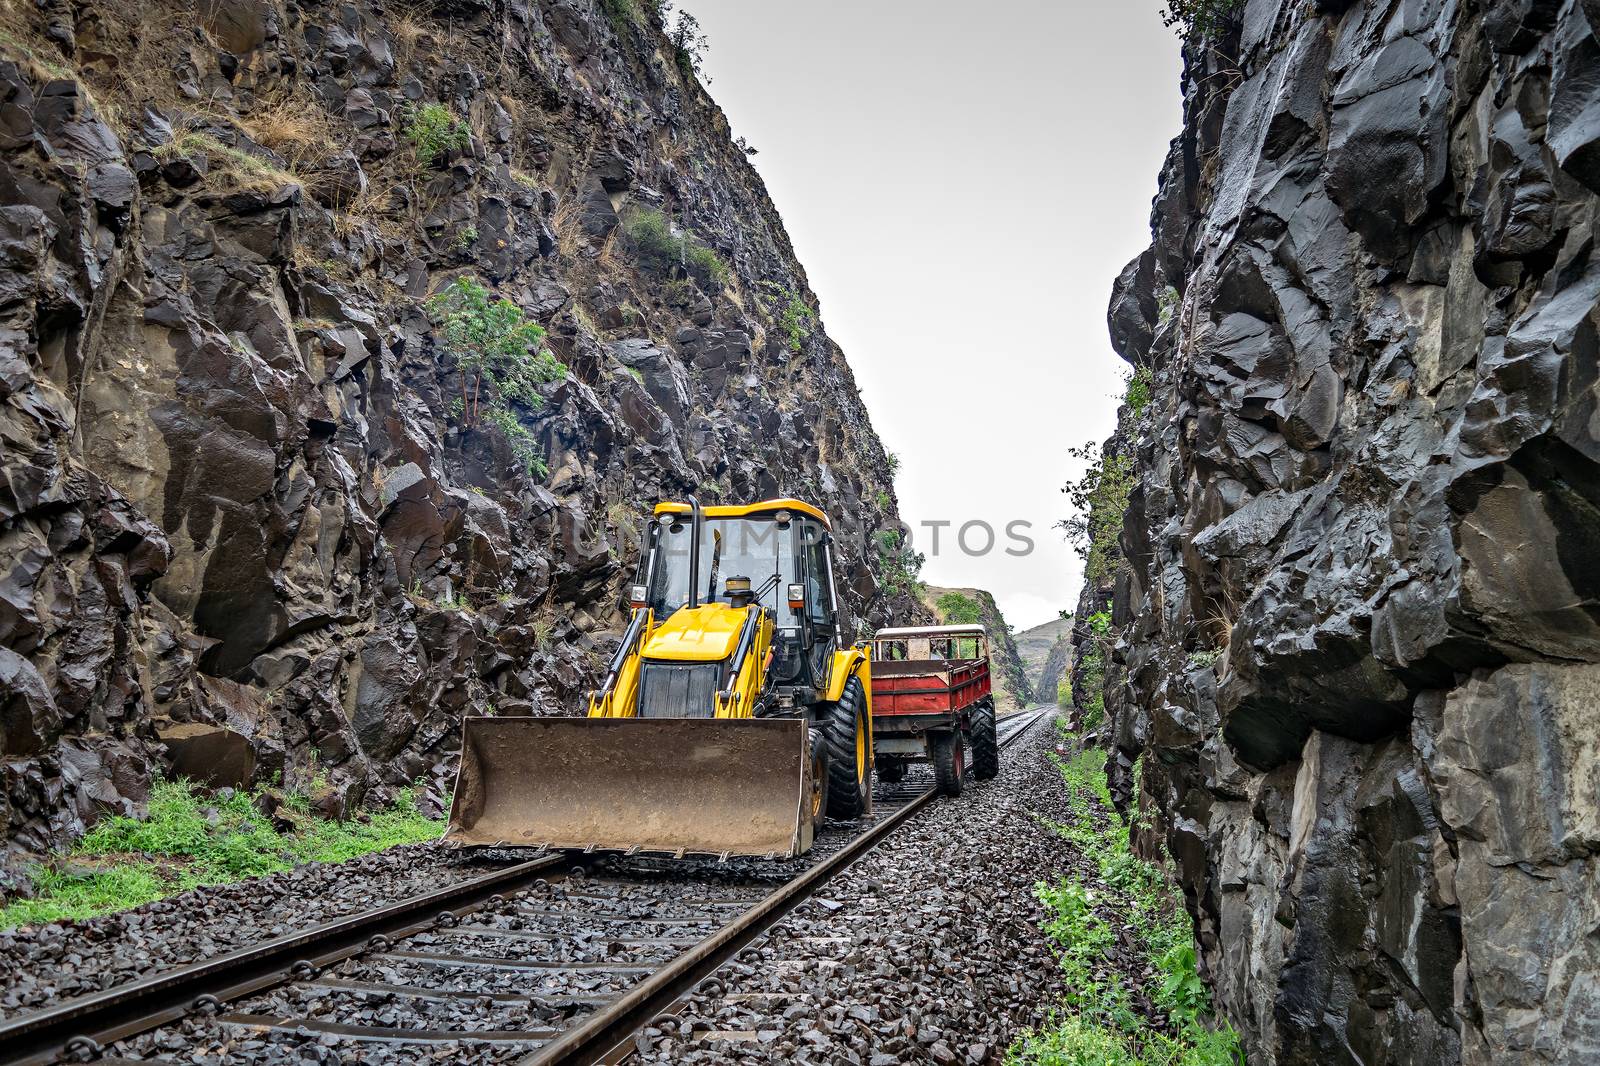 Equipment for removing vulnerable rocks on the side of railway track. by lalam